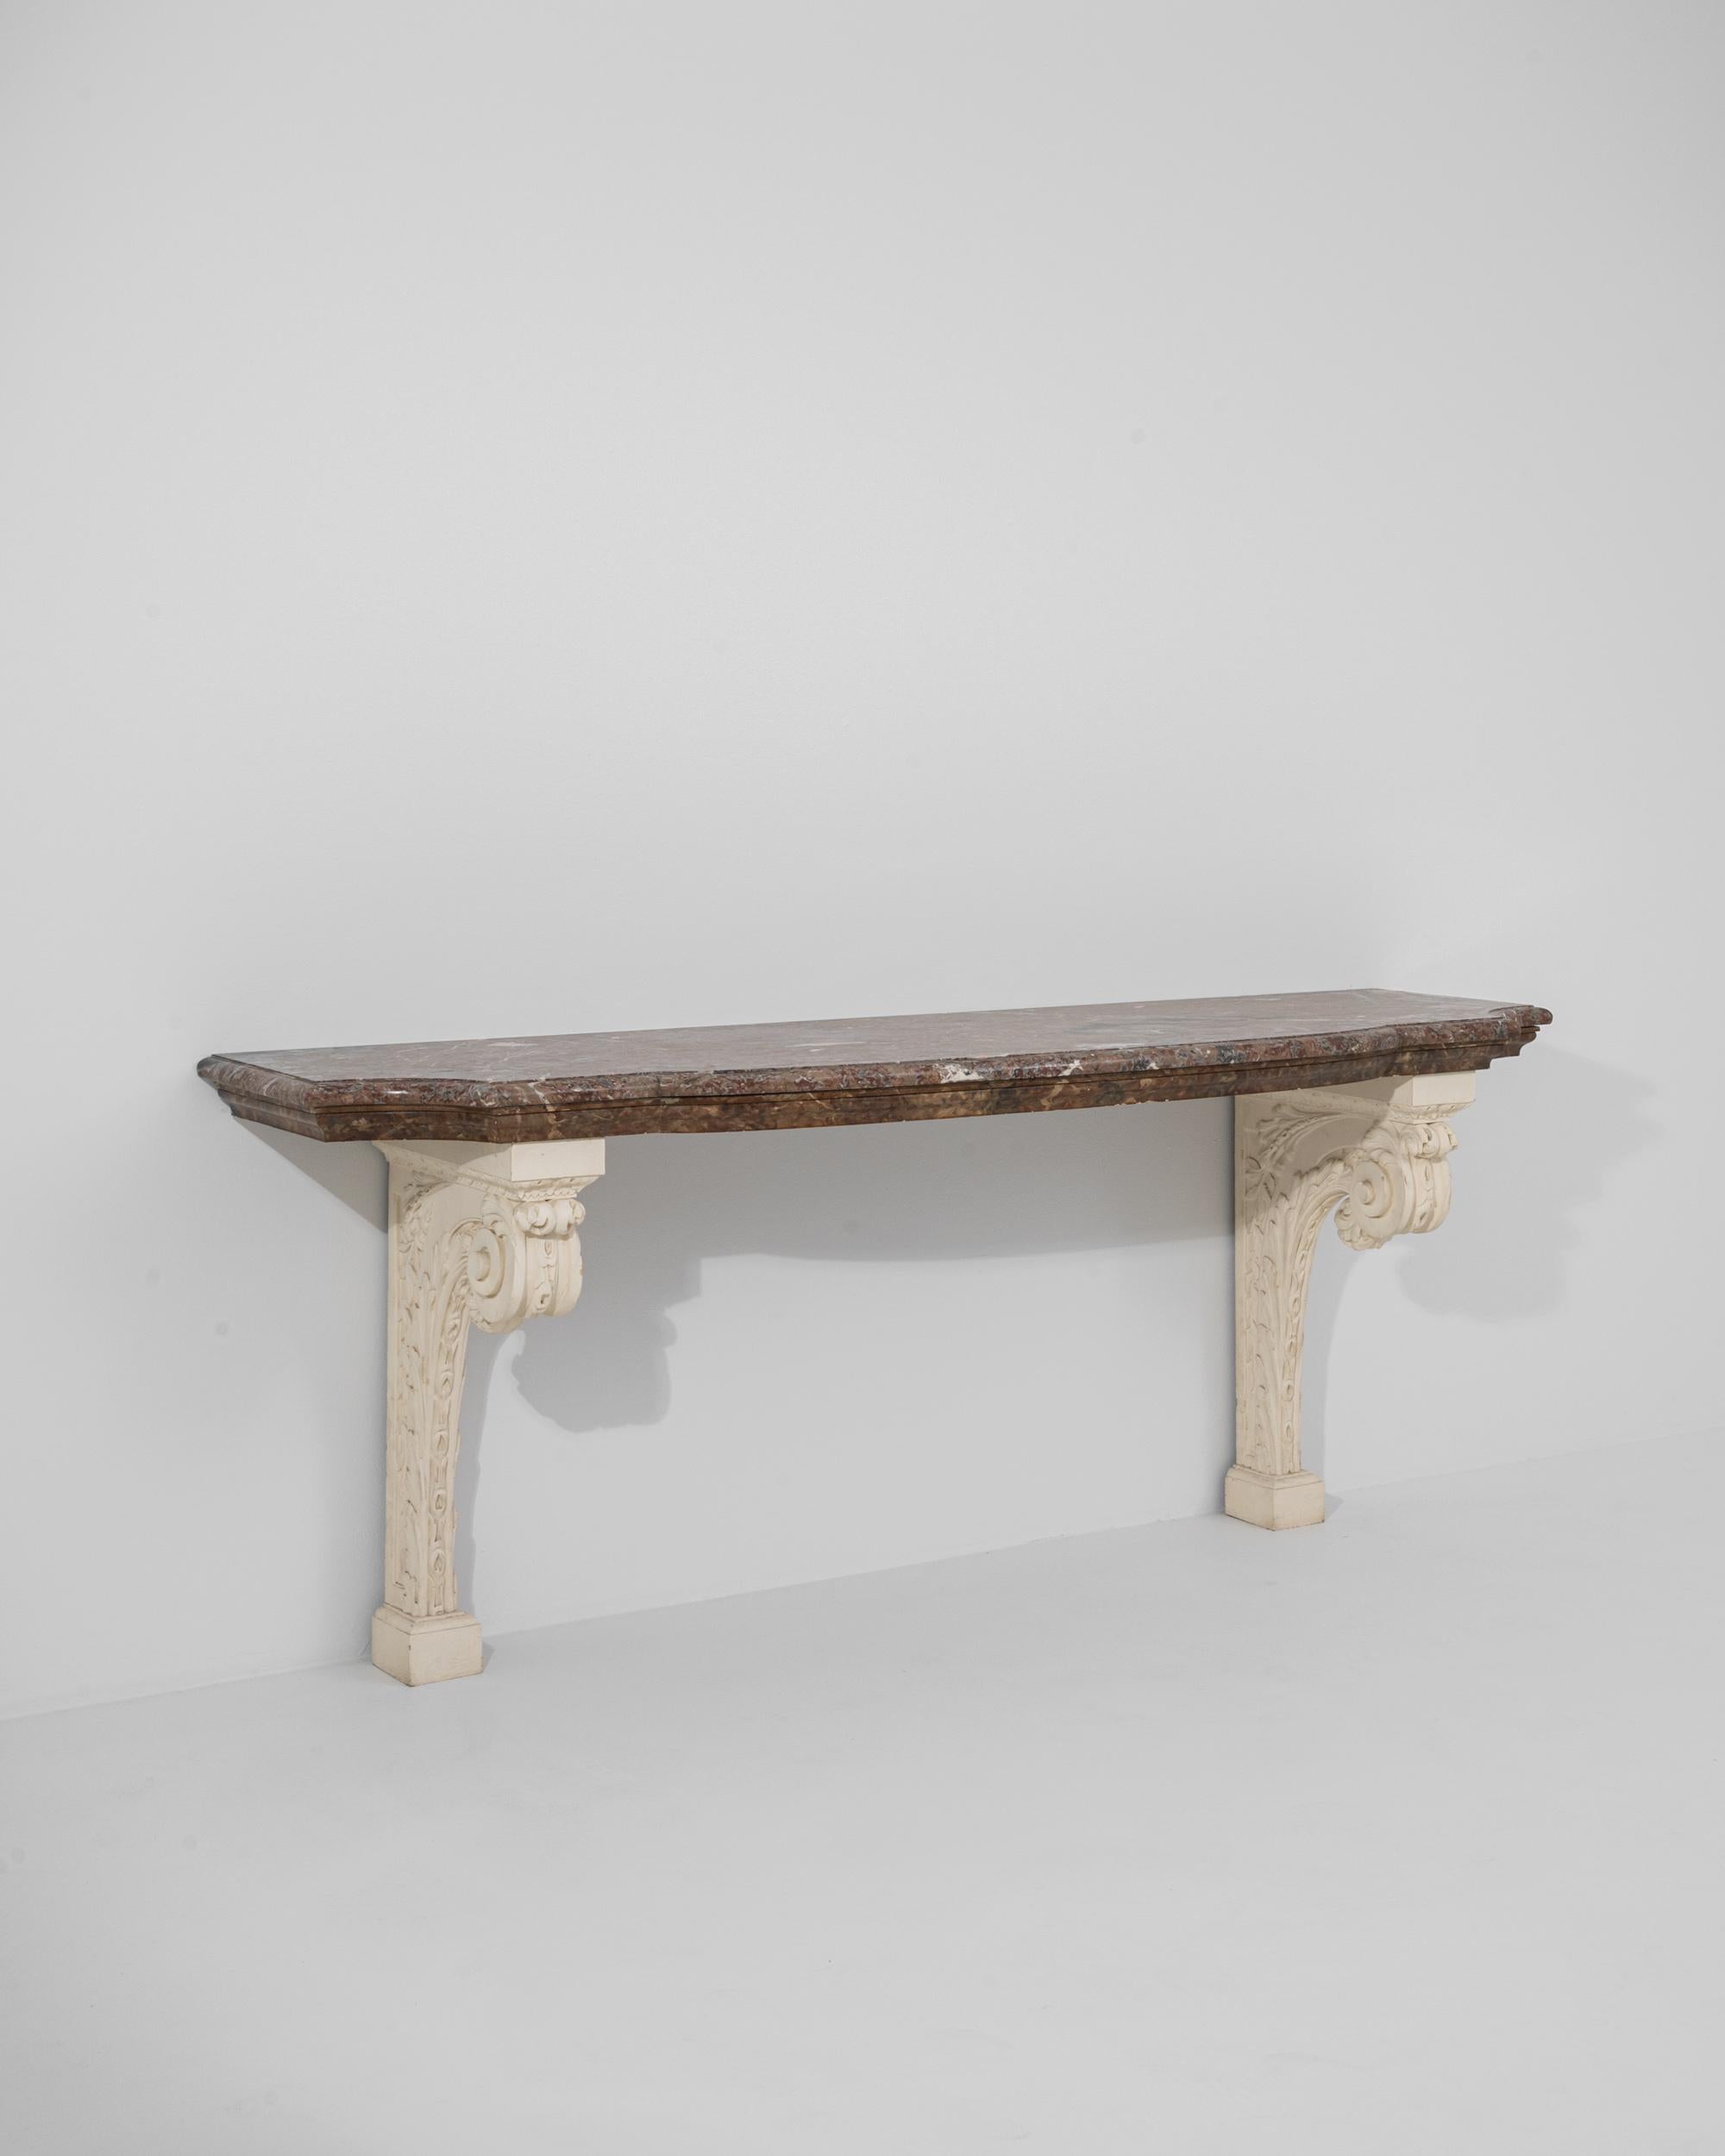 Luxurious and ornate, this turn of the century console table evokes the majesty of Baroque palaces and villas. Sourced from France, a contoured marble tabletop rests atop a pair of wooden brackets. The carved scrolls and leafy motifs of the